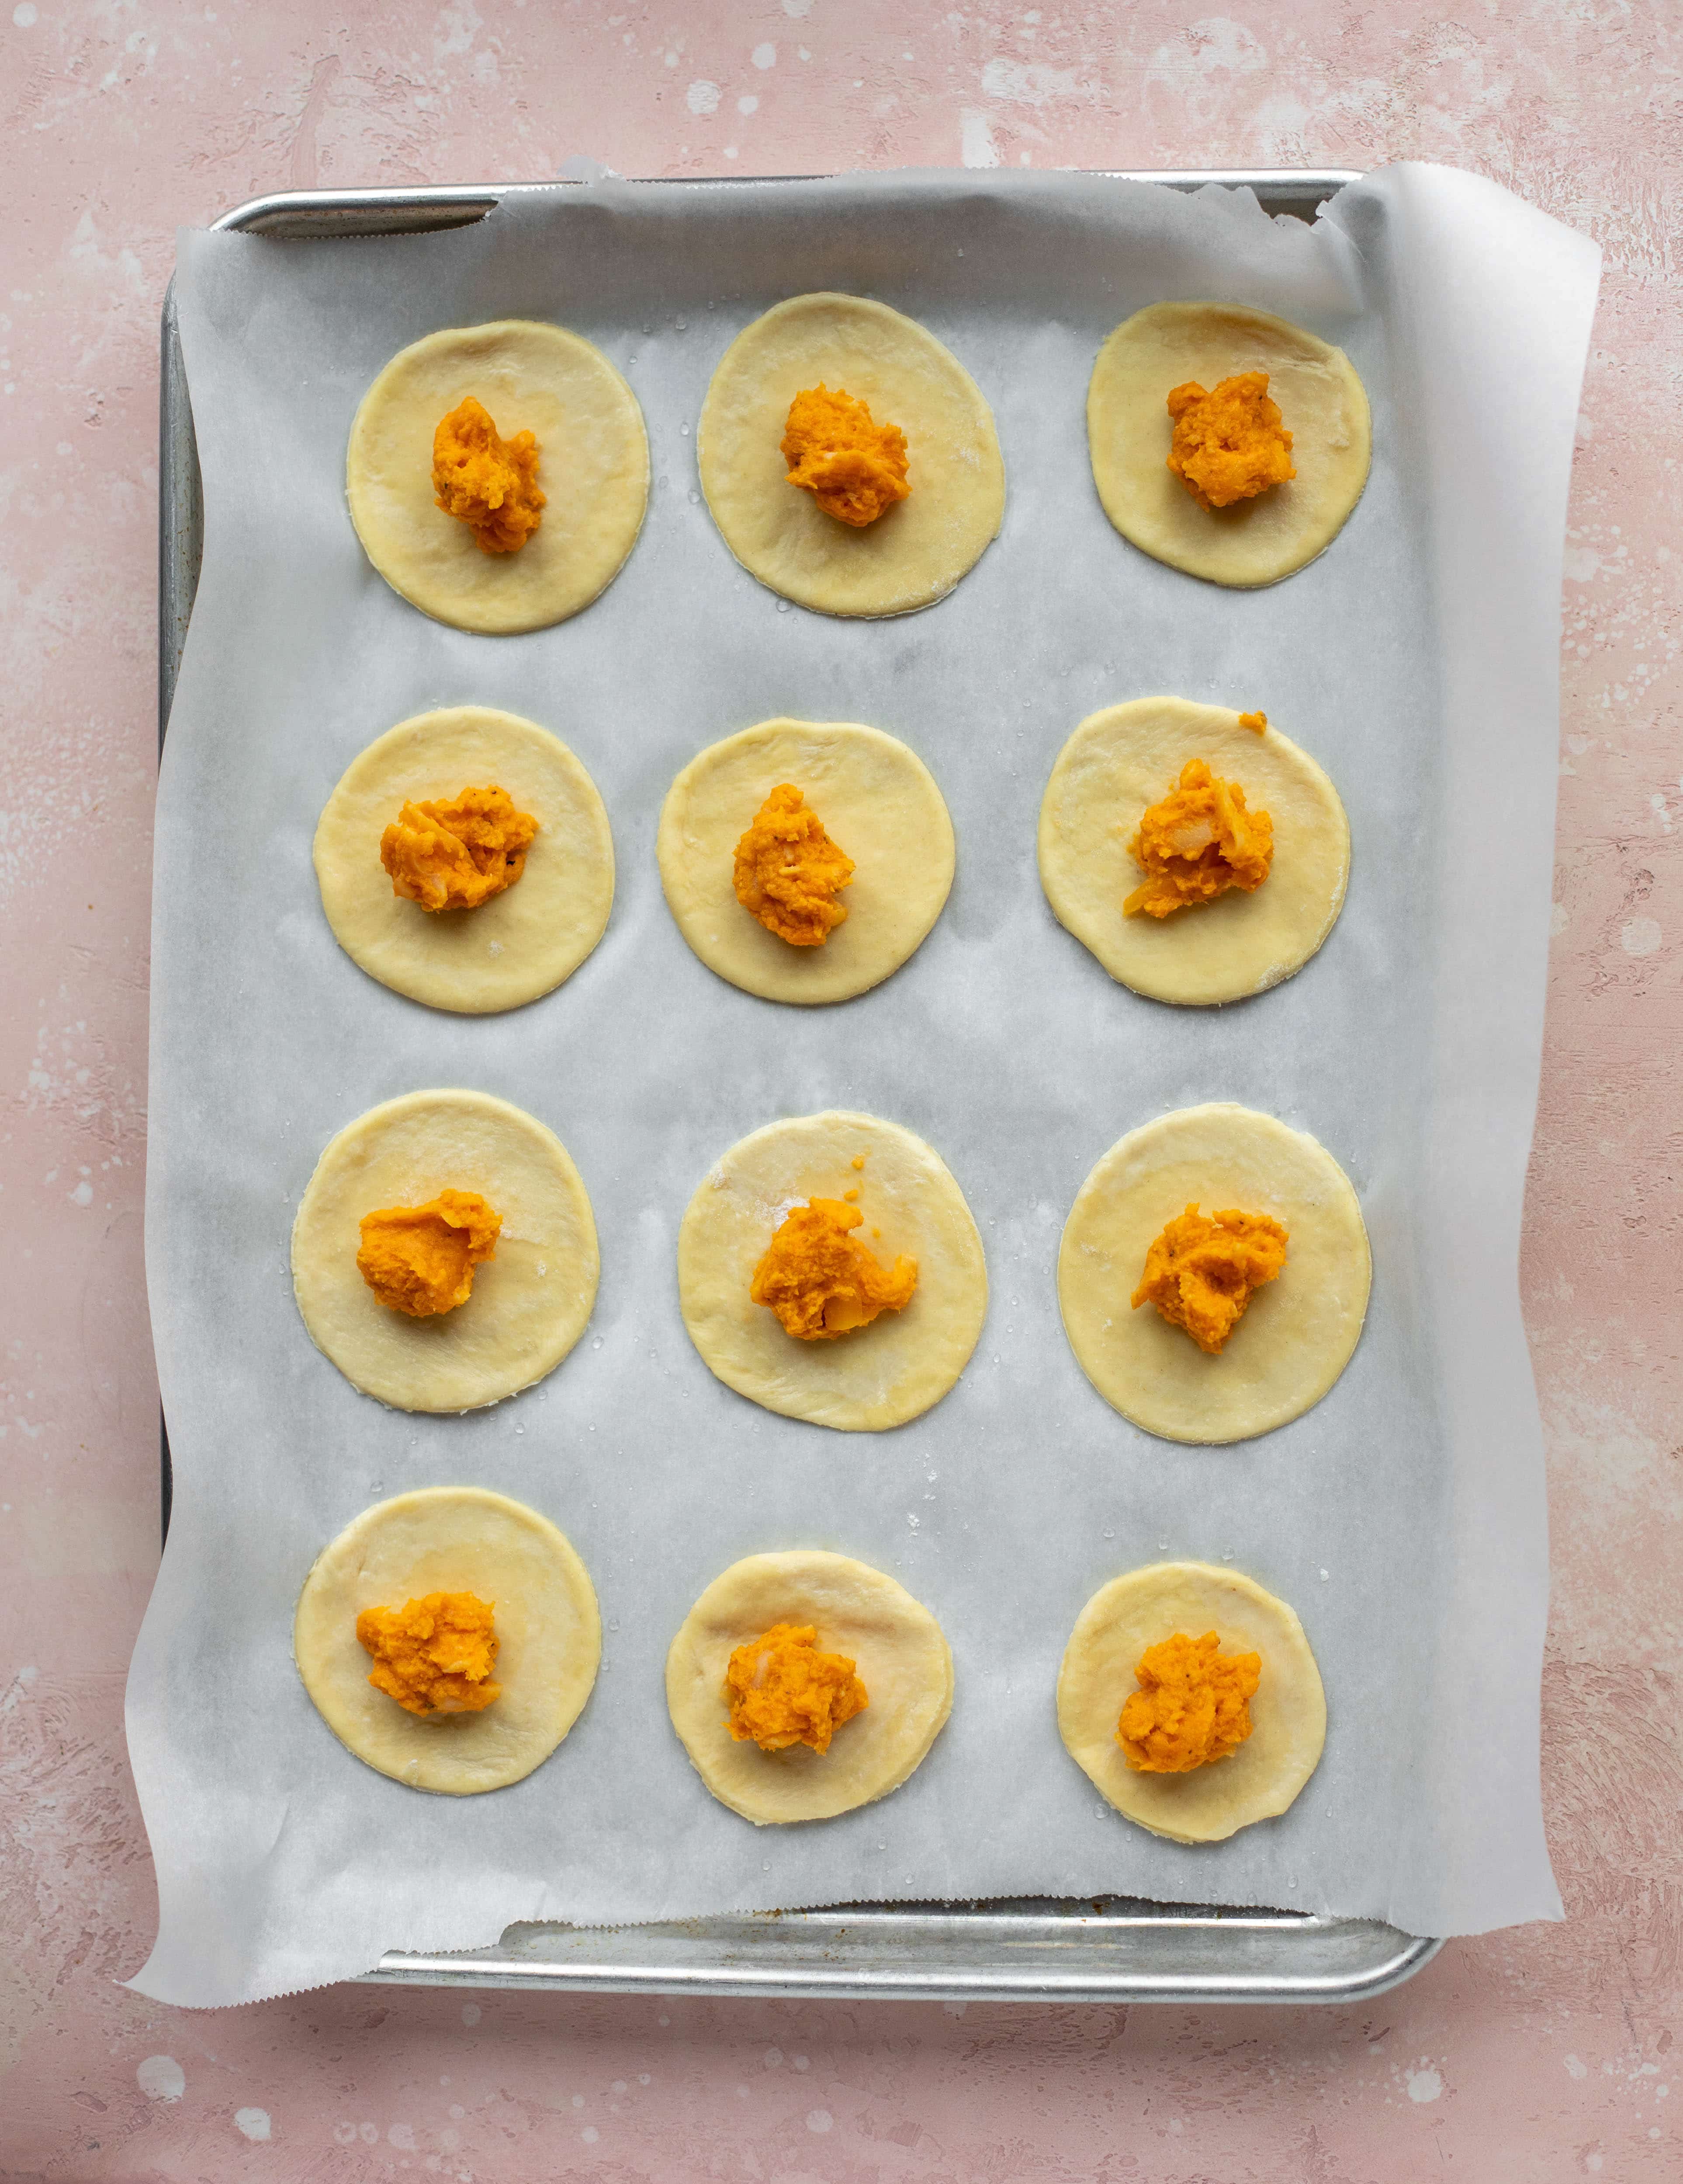 The most delicious sweet potato pierogi recipe! Roasted sweet potato and fontina cheese in pillowy dough. Make sure to serve with brown butter!